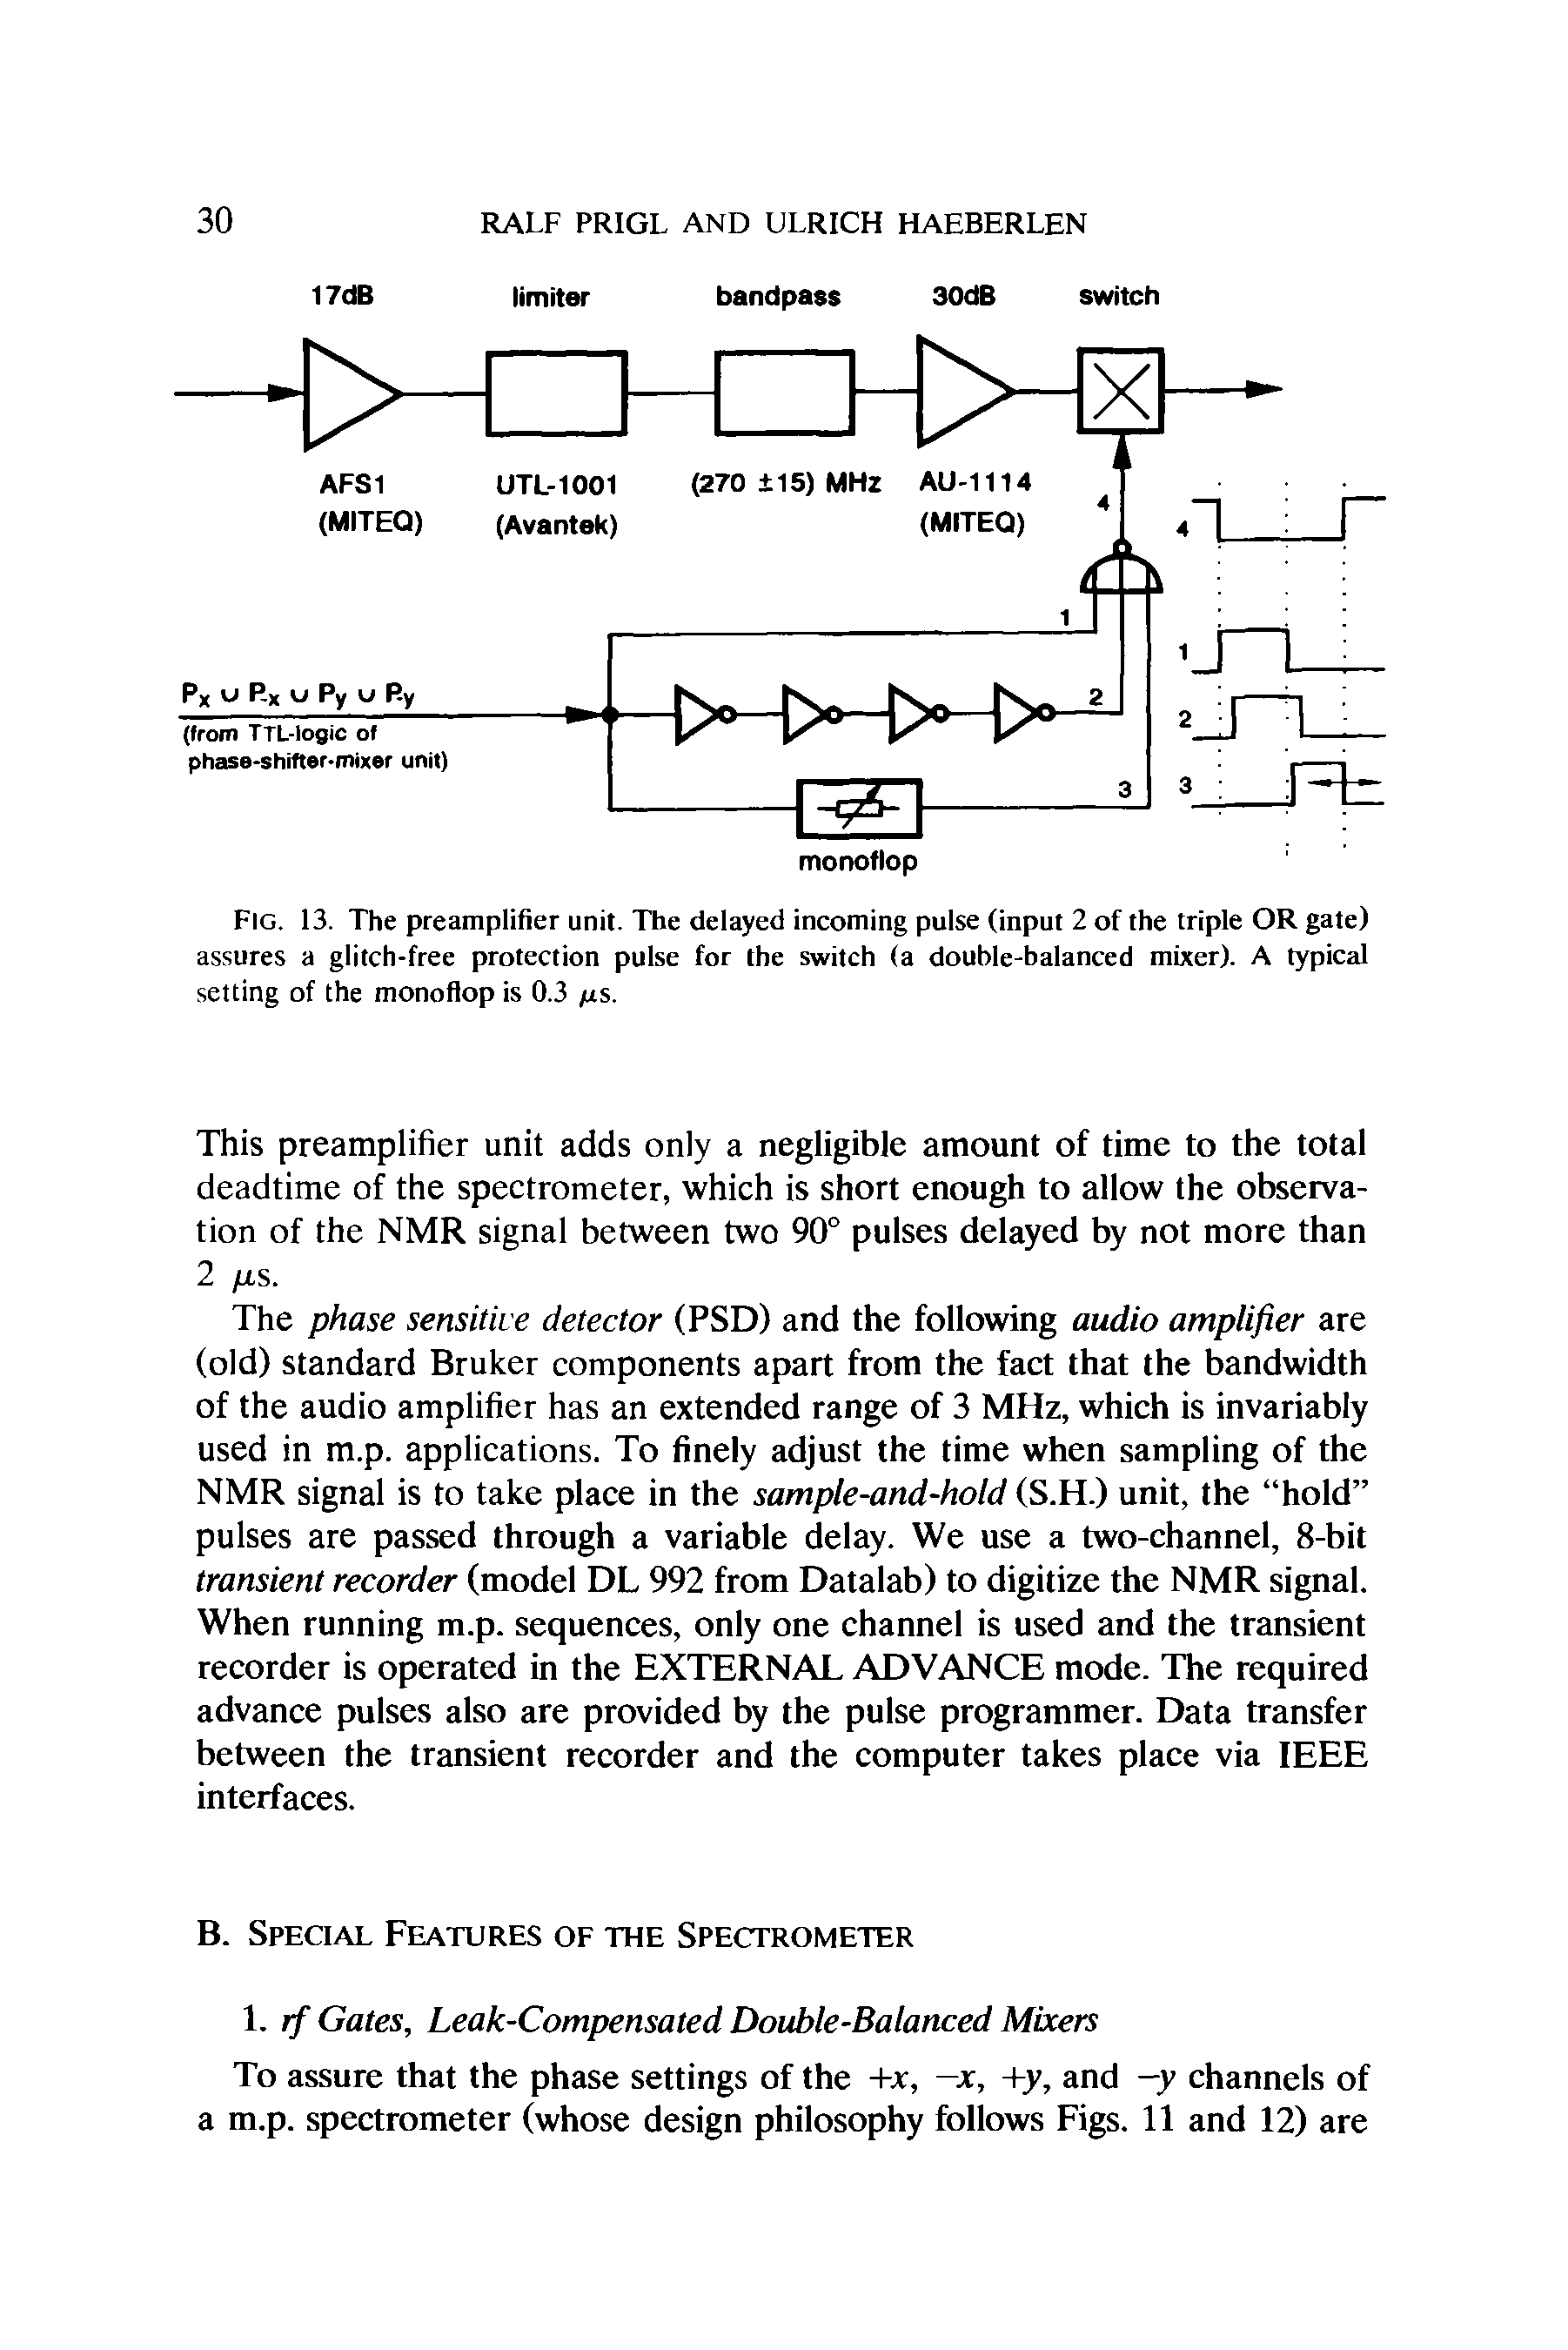 Fig. 13. The preamplifier unit. The delayed incoming pulse (input 2 of the triple OR gate) assures a glitch-free protection pulse for the switch (a double-balanced mixer). A typical setting of the monoflop is 0.3 /us.